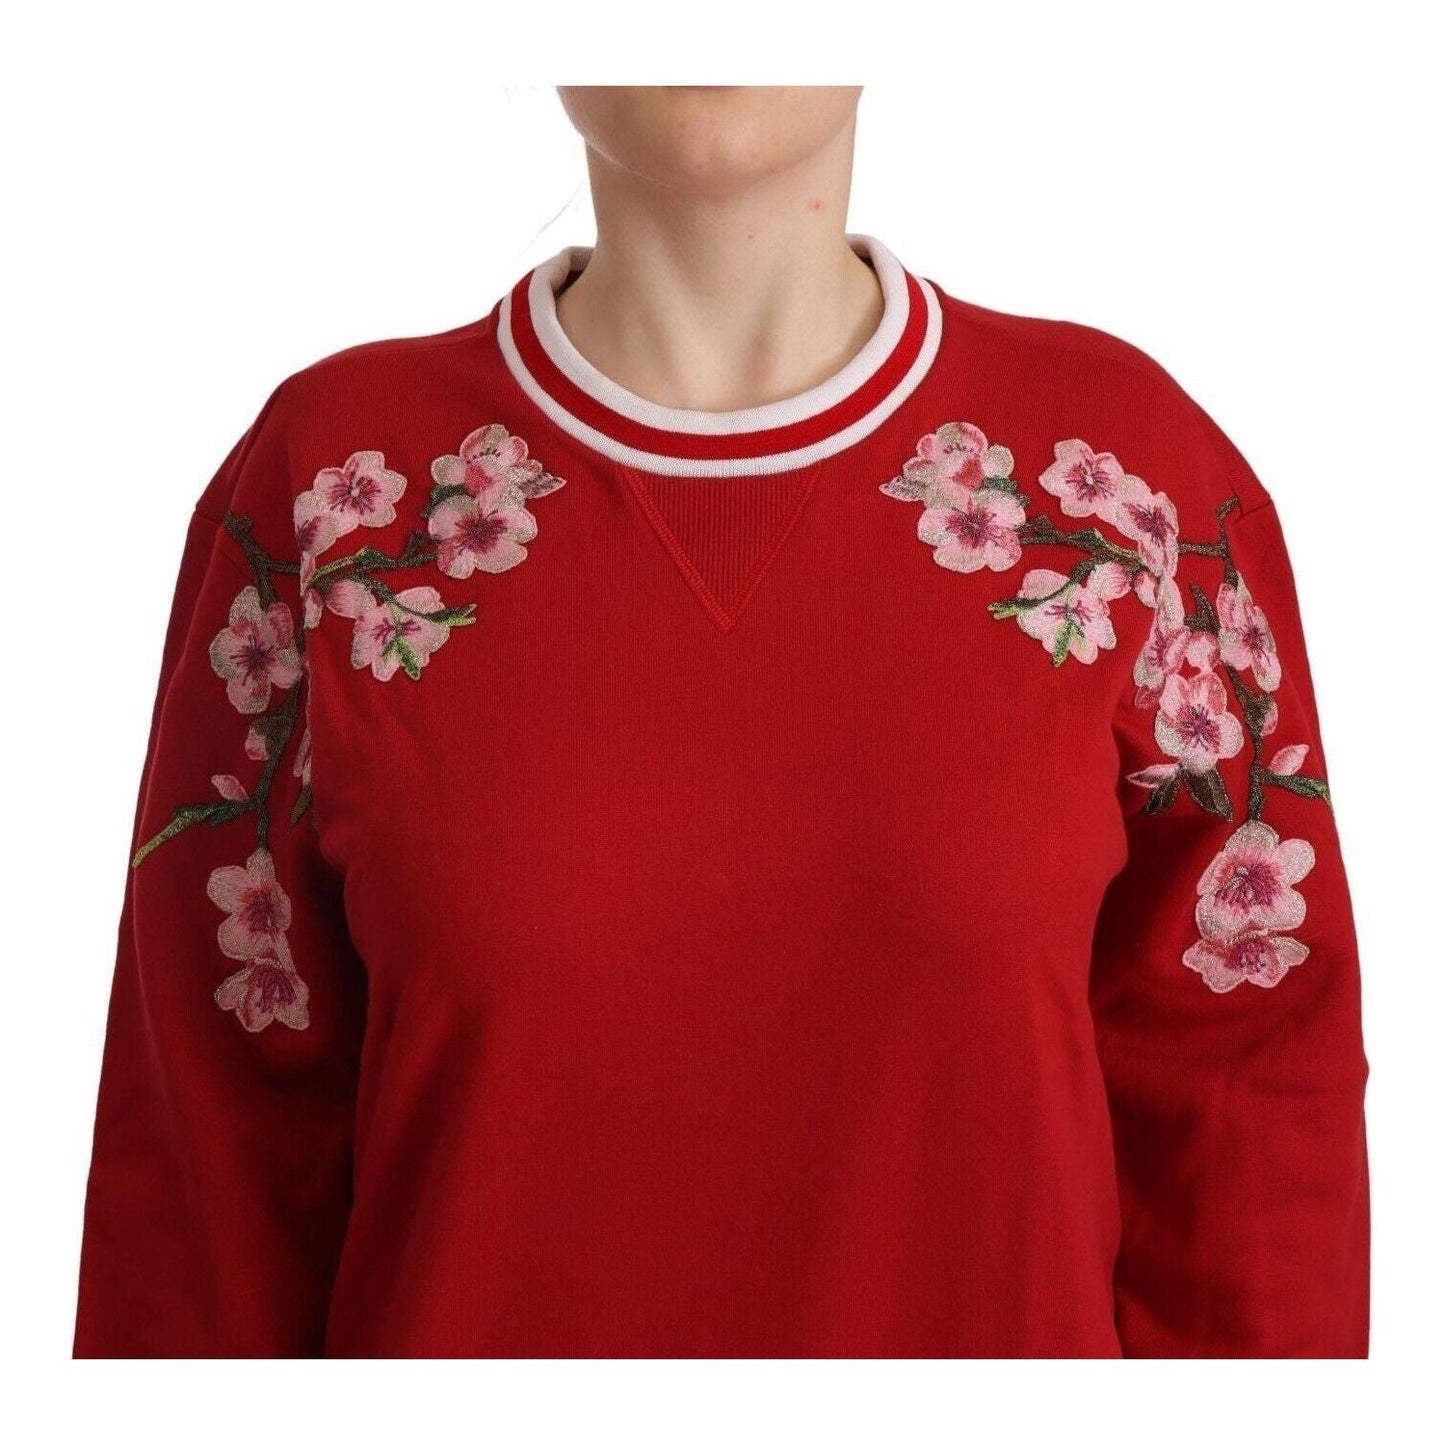 Dolce & Gabbana Elegant Red Crewneck Pullover with Floral Motif red-cotton-crewneck-dglove-pullover-sweater WOMAN SWEATERS